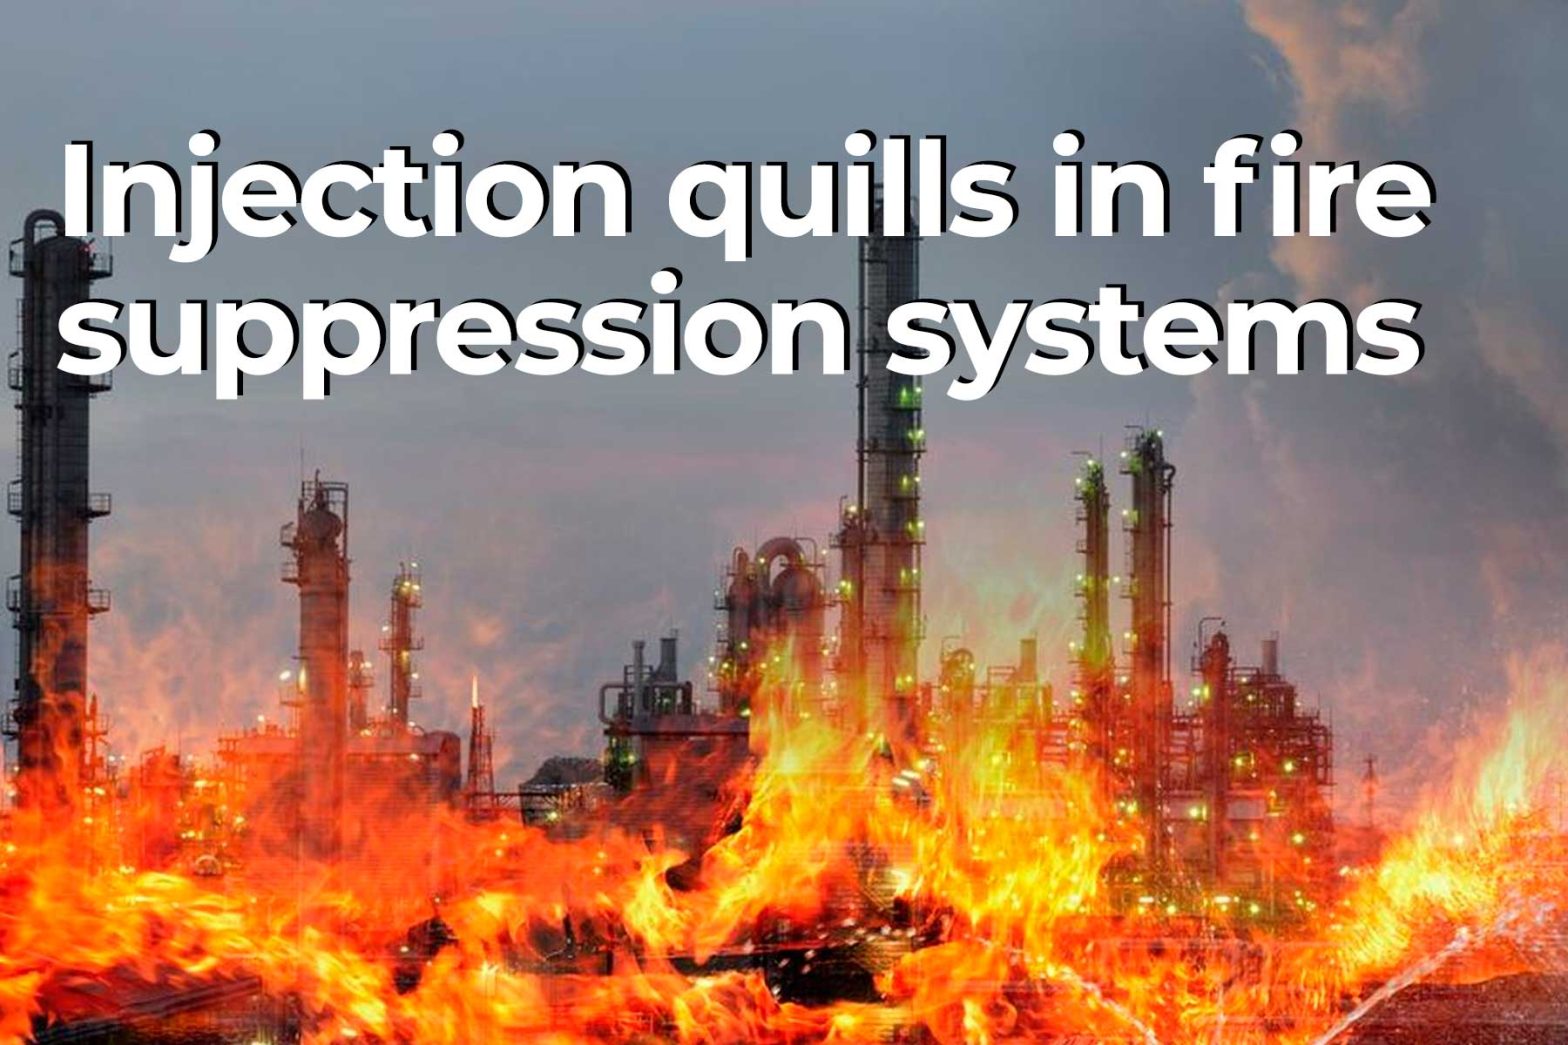 Types of chemicals used by injection quills in fire suppression systems